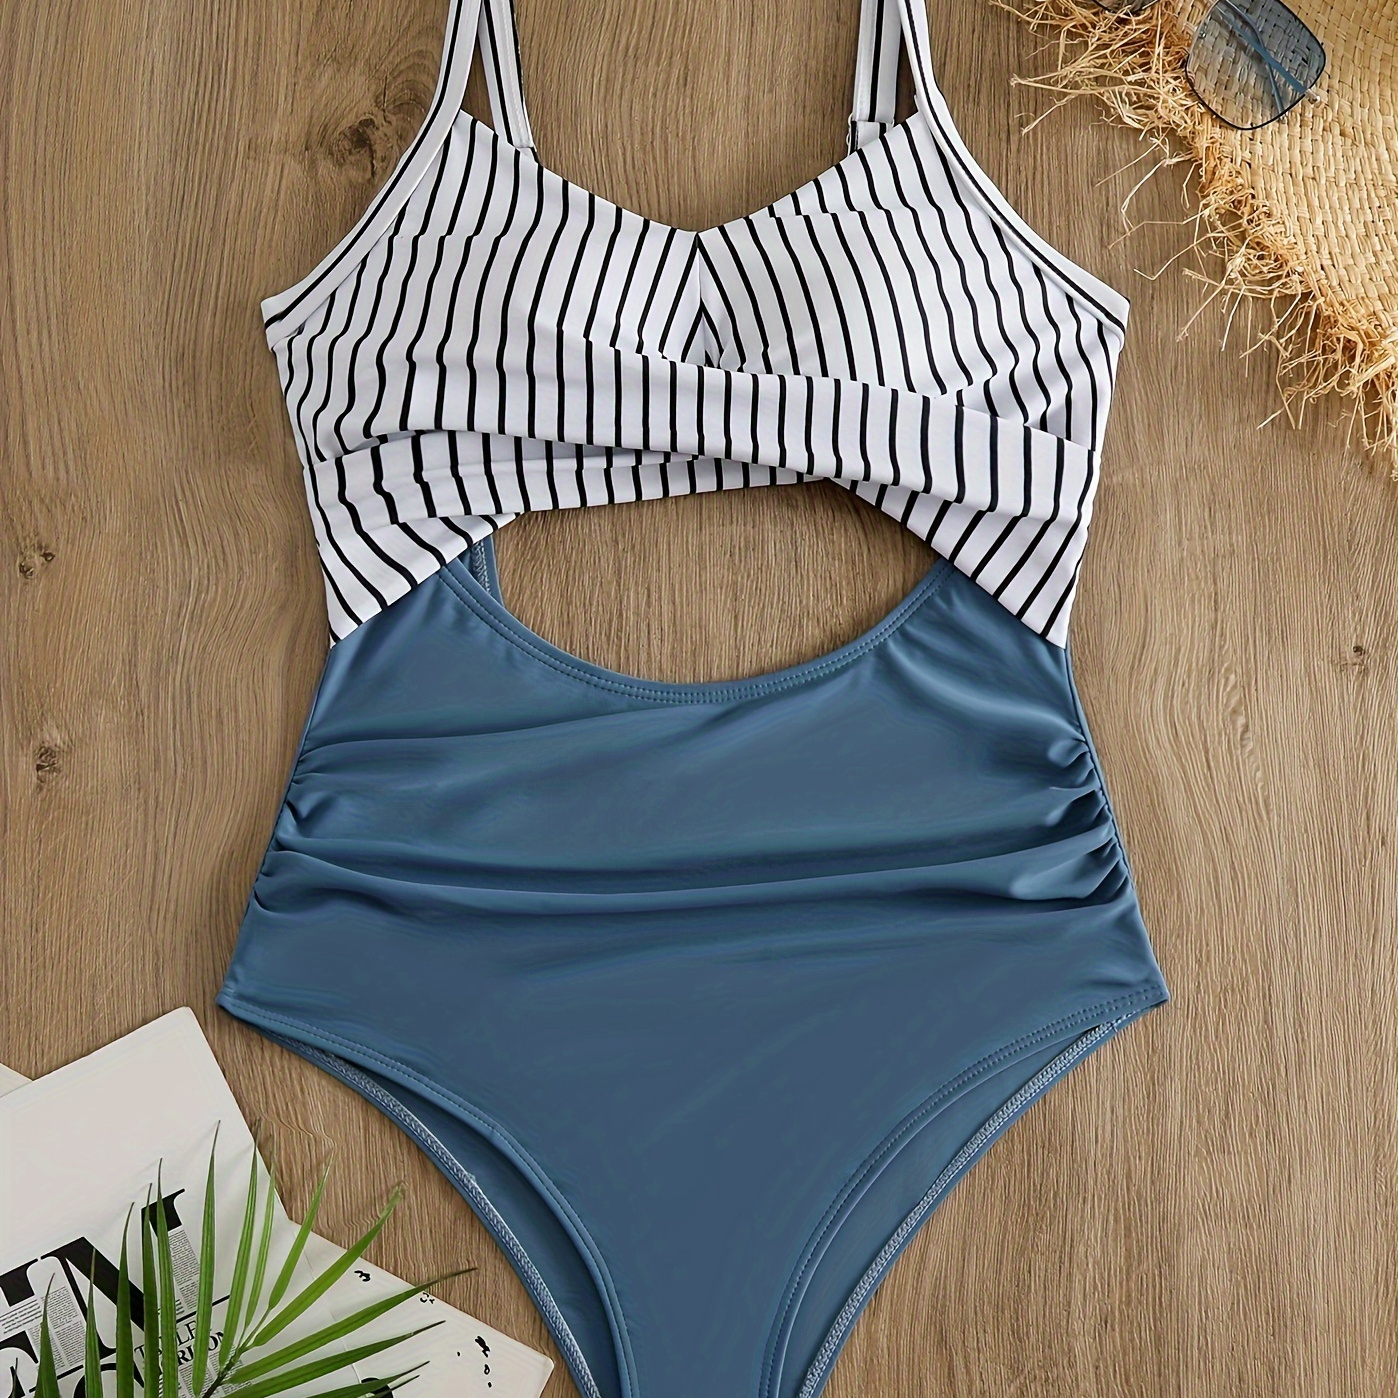 

Striped Print Cut Out Ruched One-piece Swimsuit, Twist V Neck Tummy Control Bathing Suits, Women's Swimwear & Clothing